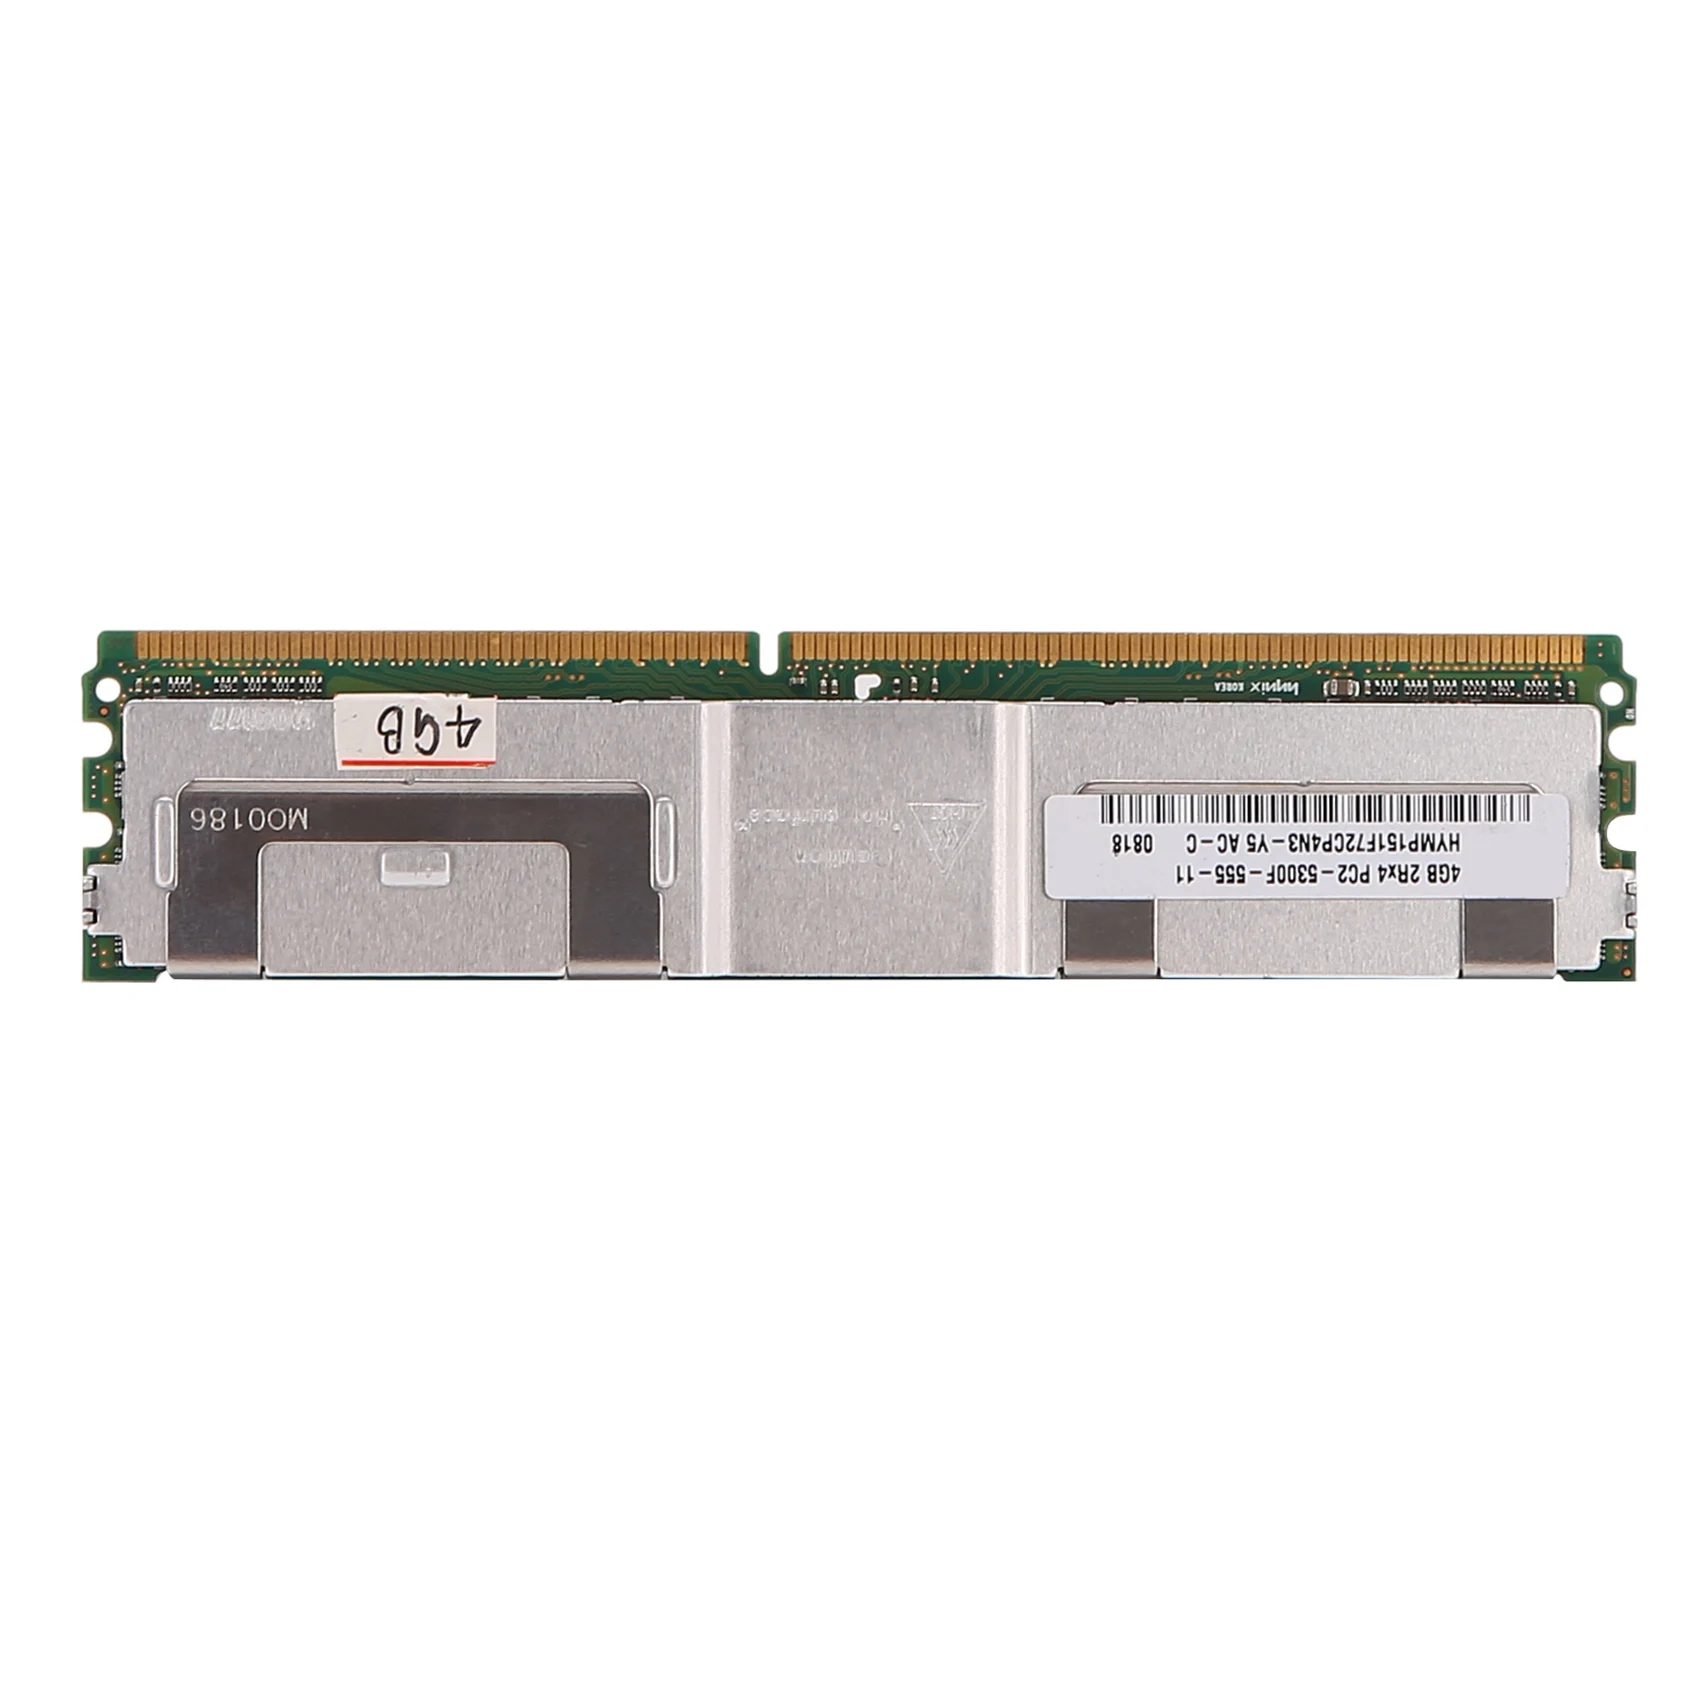 

DDR2 4GB Ram Memory 667Mhz PC2 5300 240 Pins 1.8V FB DIMM with Cooling Vest for AMD Intel Desktop Memory